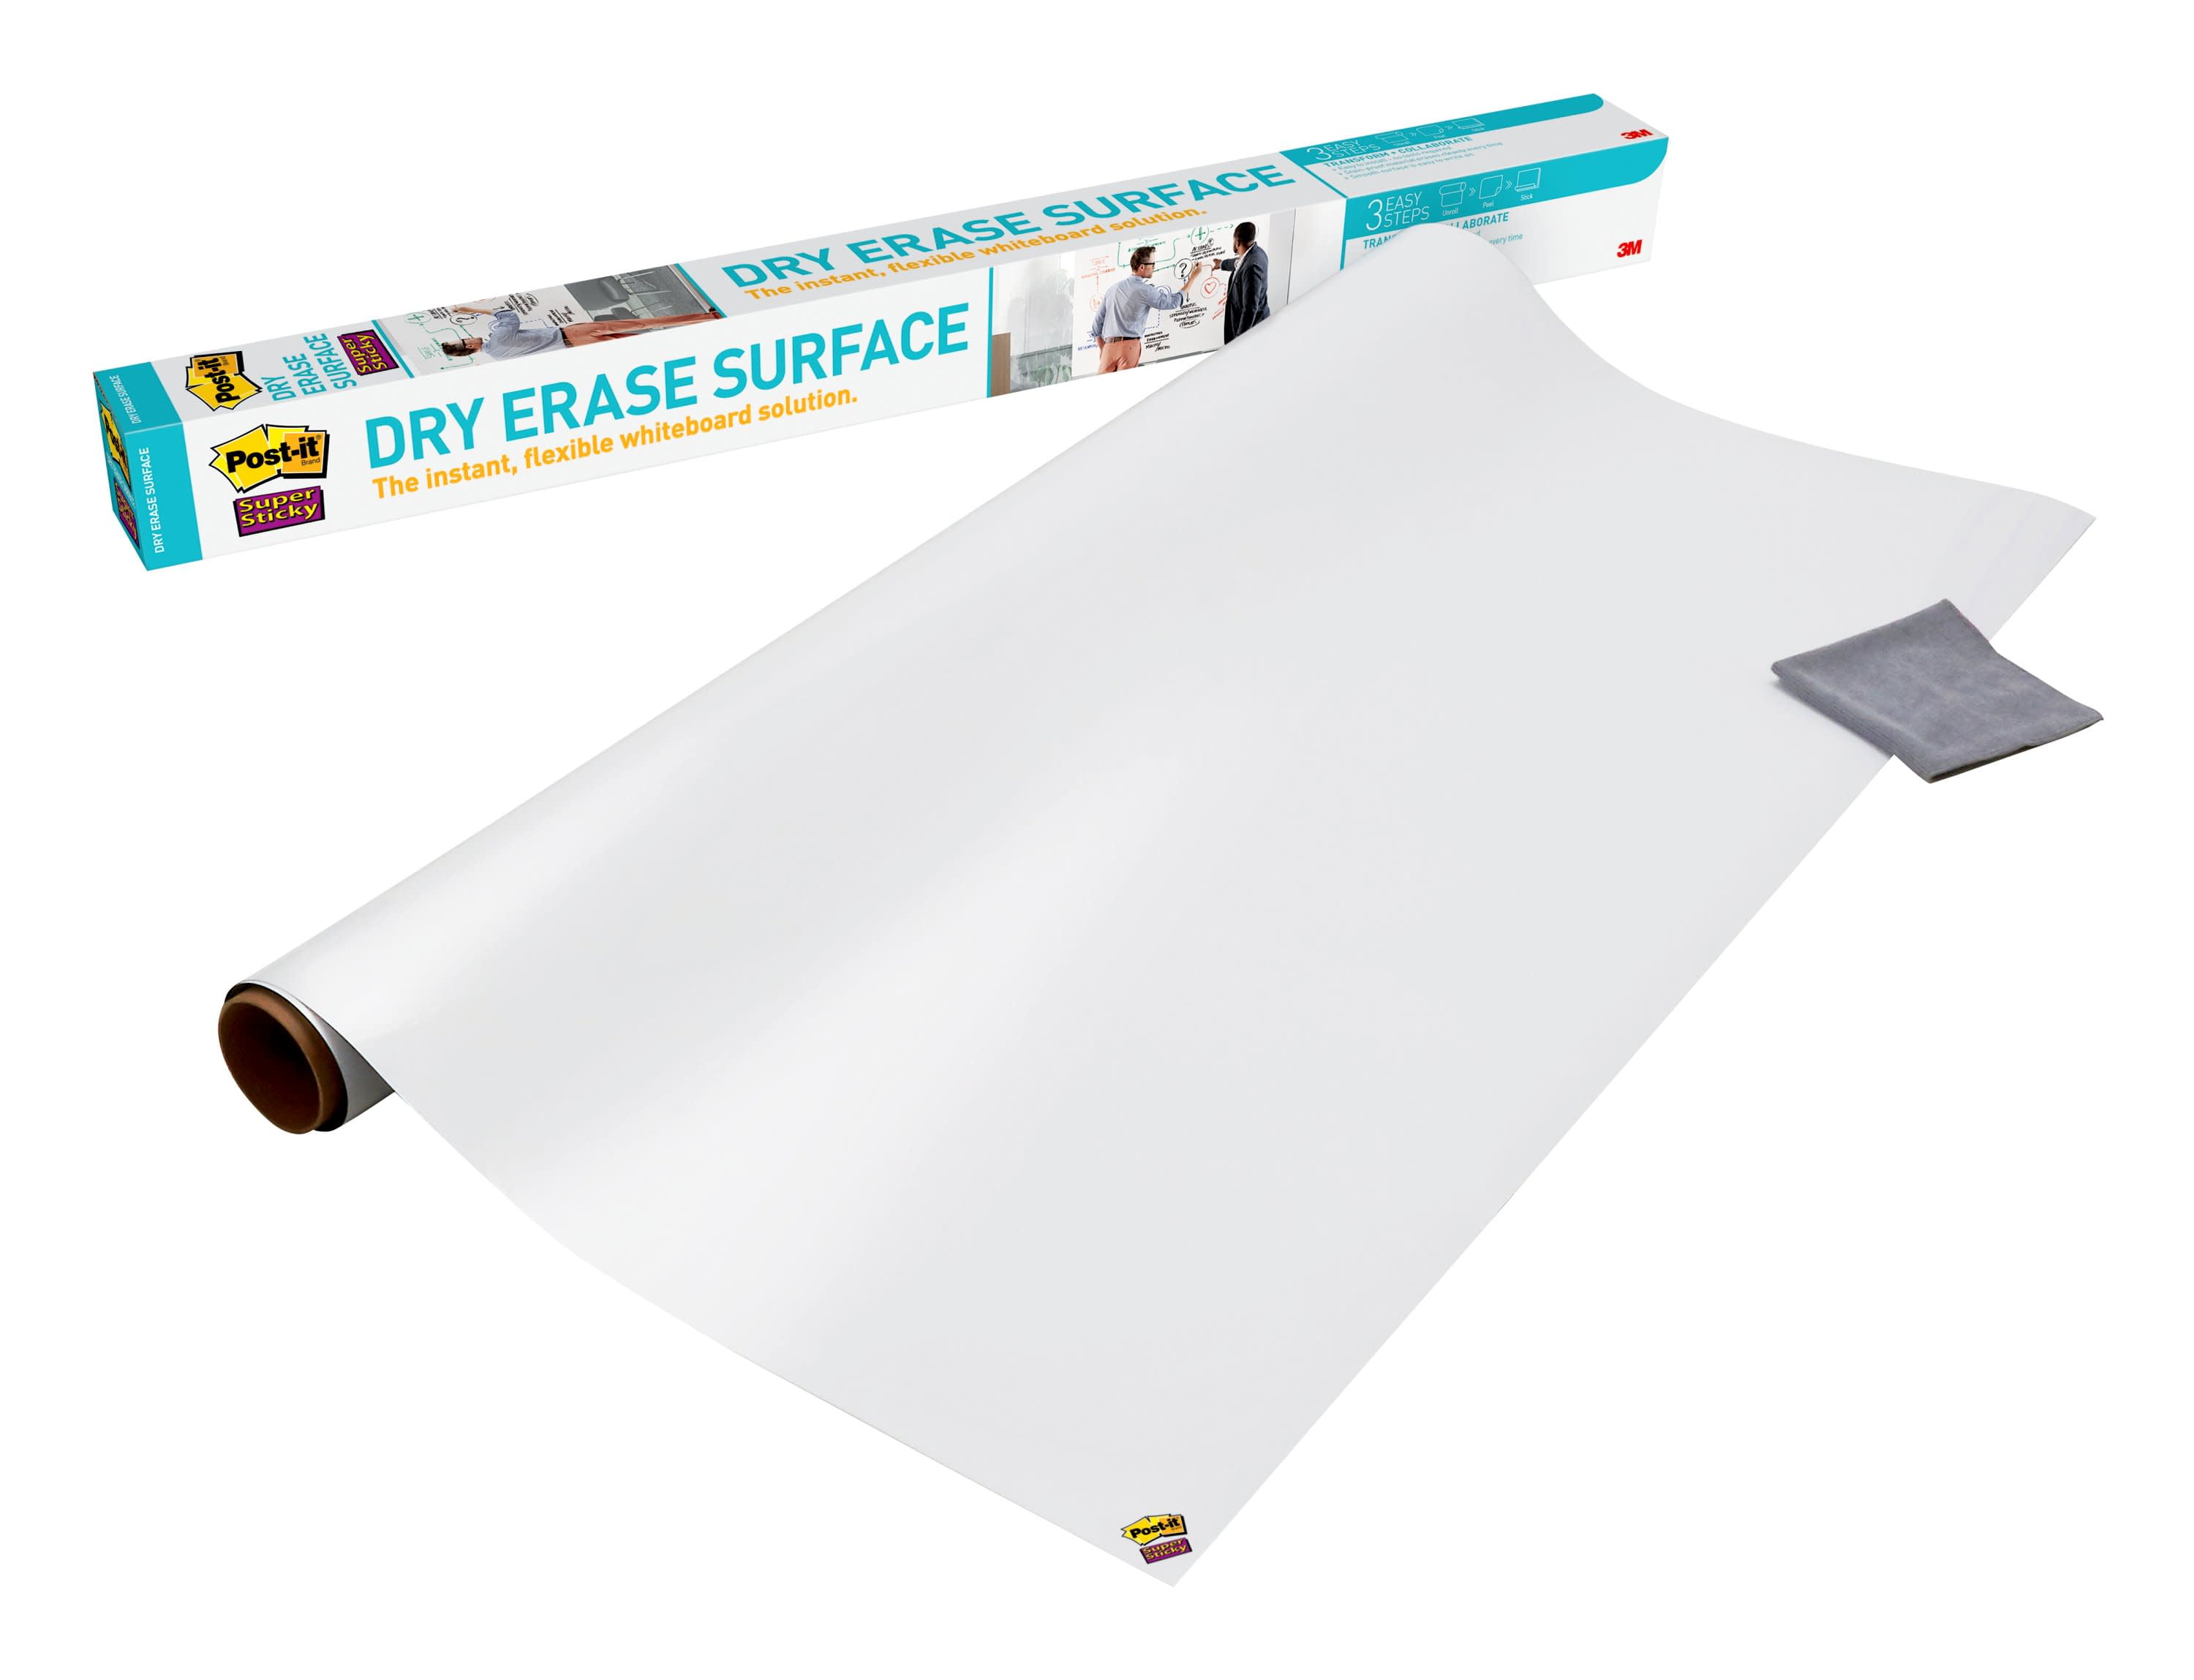 GoWrite Self-Stick Dry Erase Surface Roll White 18”x 6' New Sealed